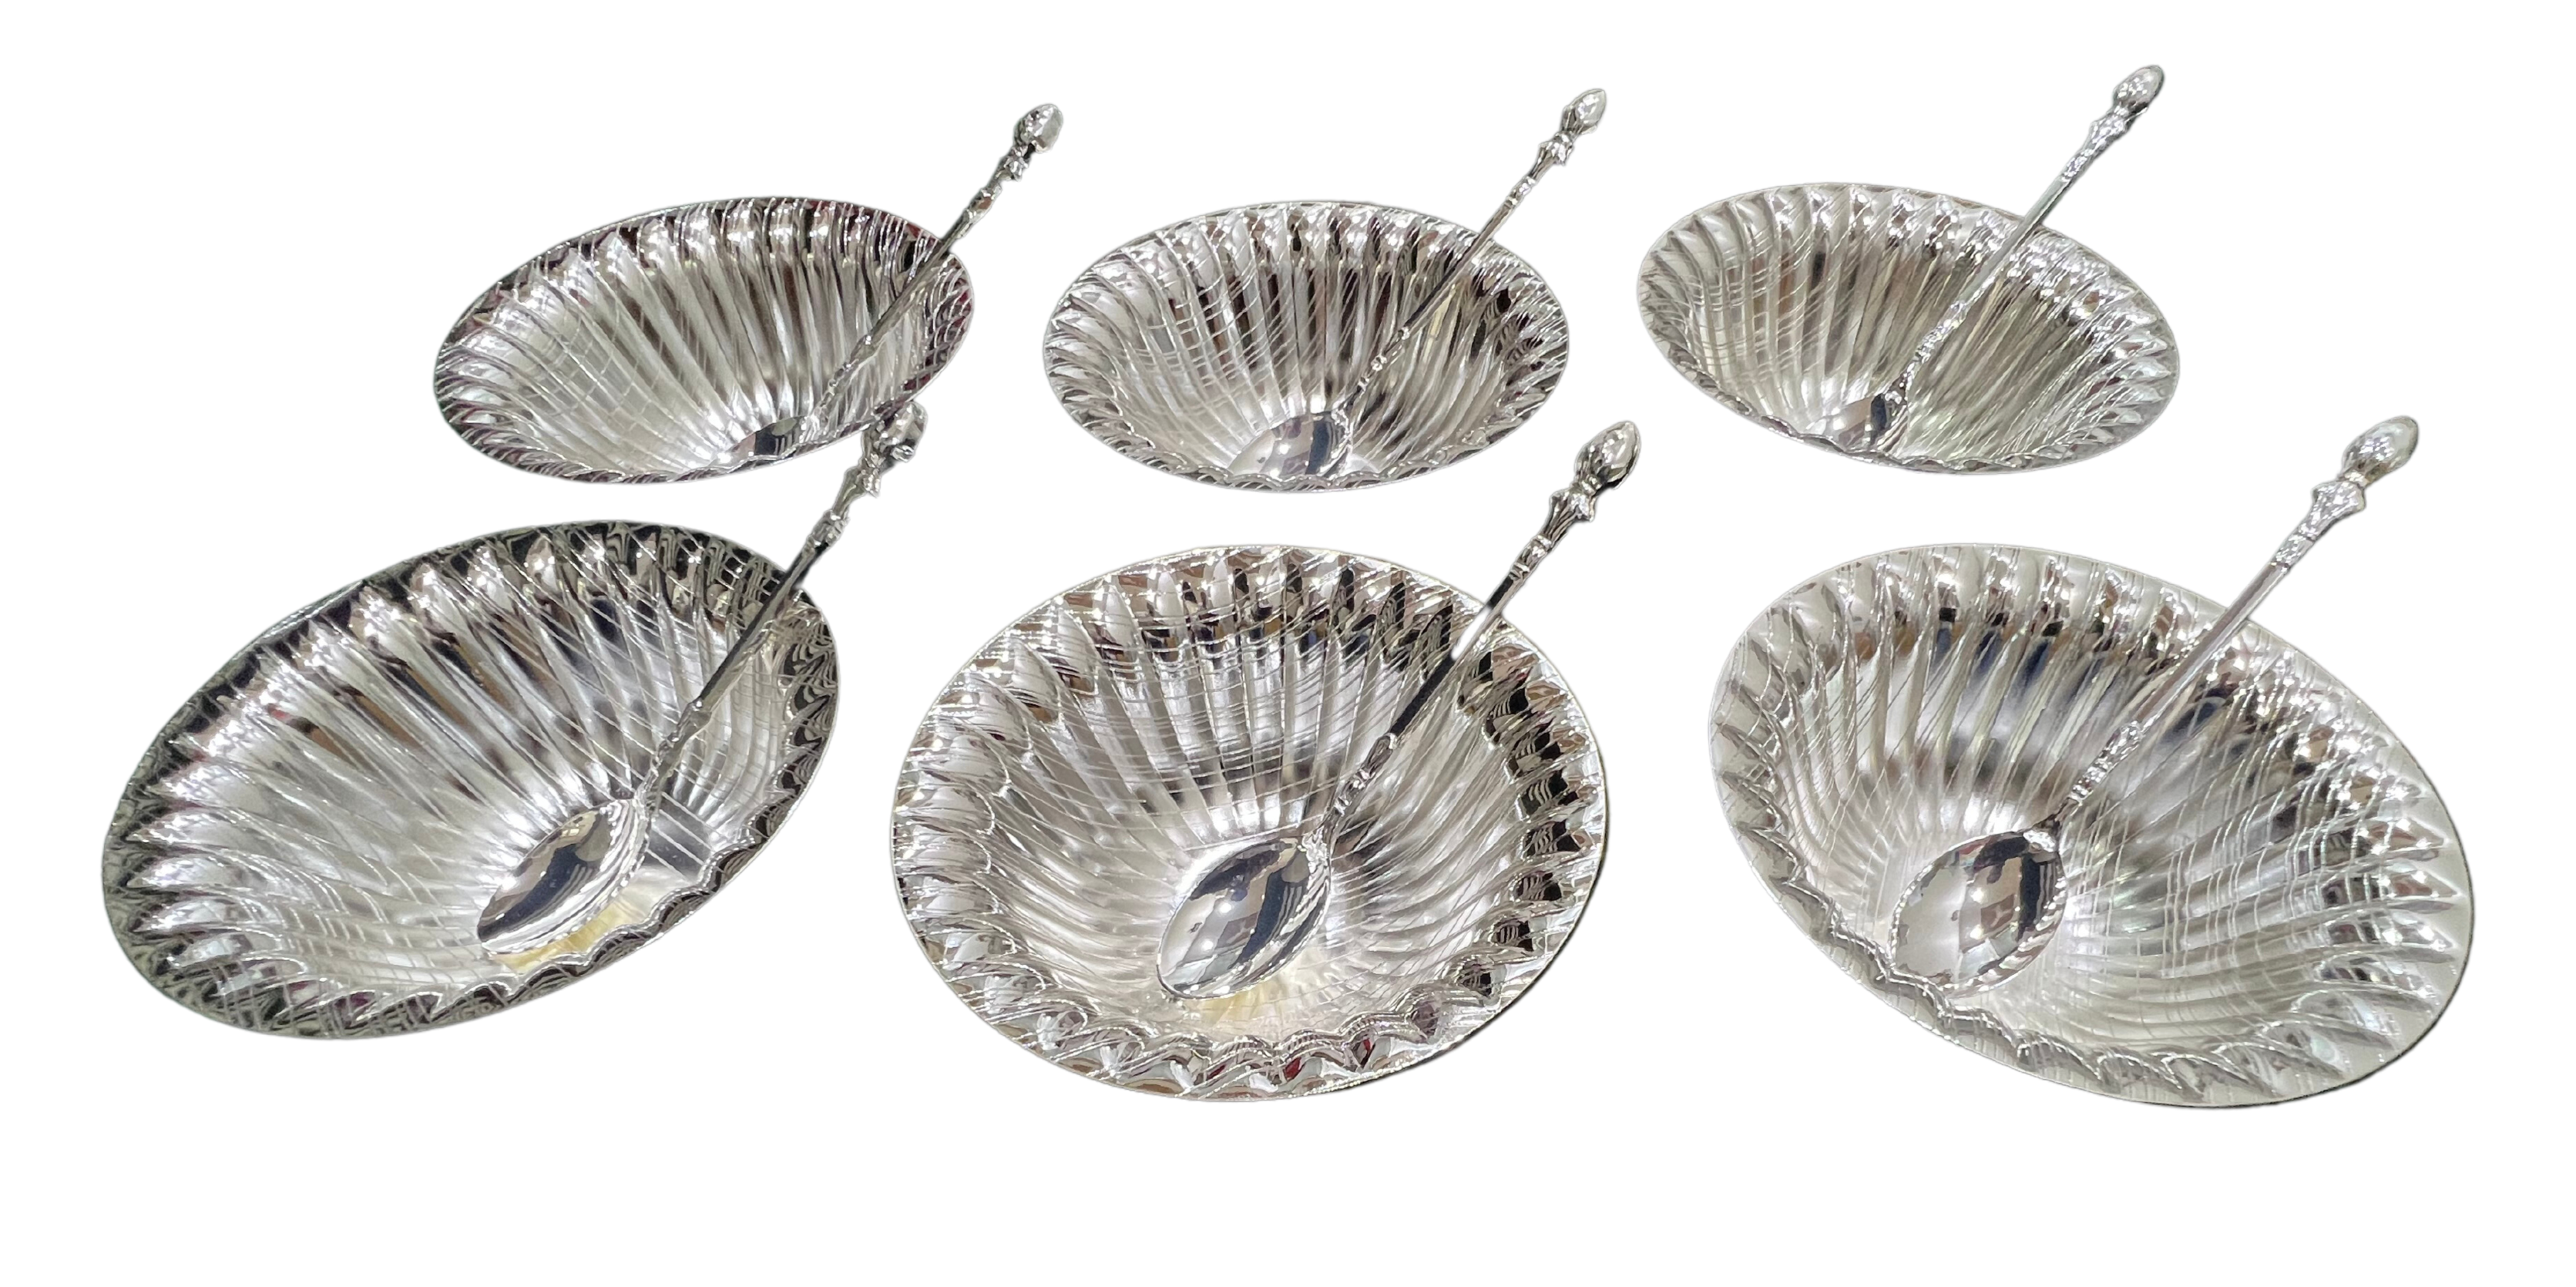 Silver And Gold Plated Bowls at Latest Price in Delhi, Manufacturer &  Supplier